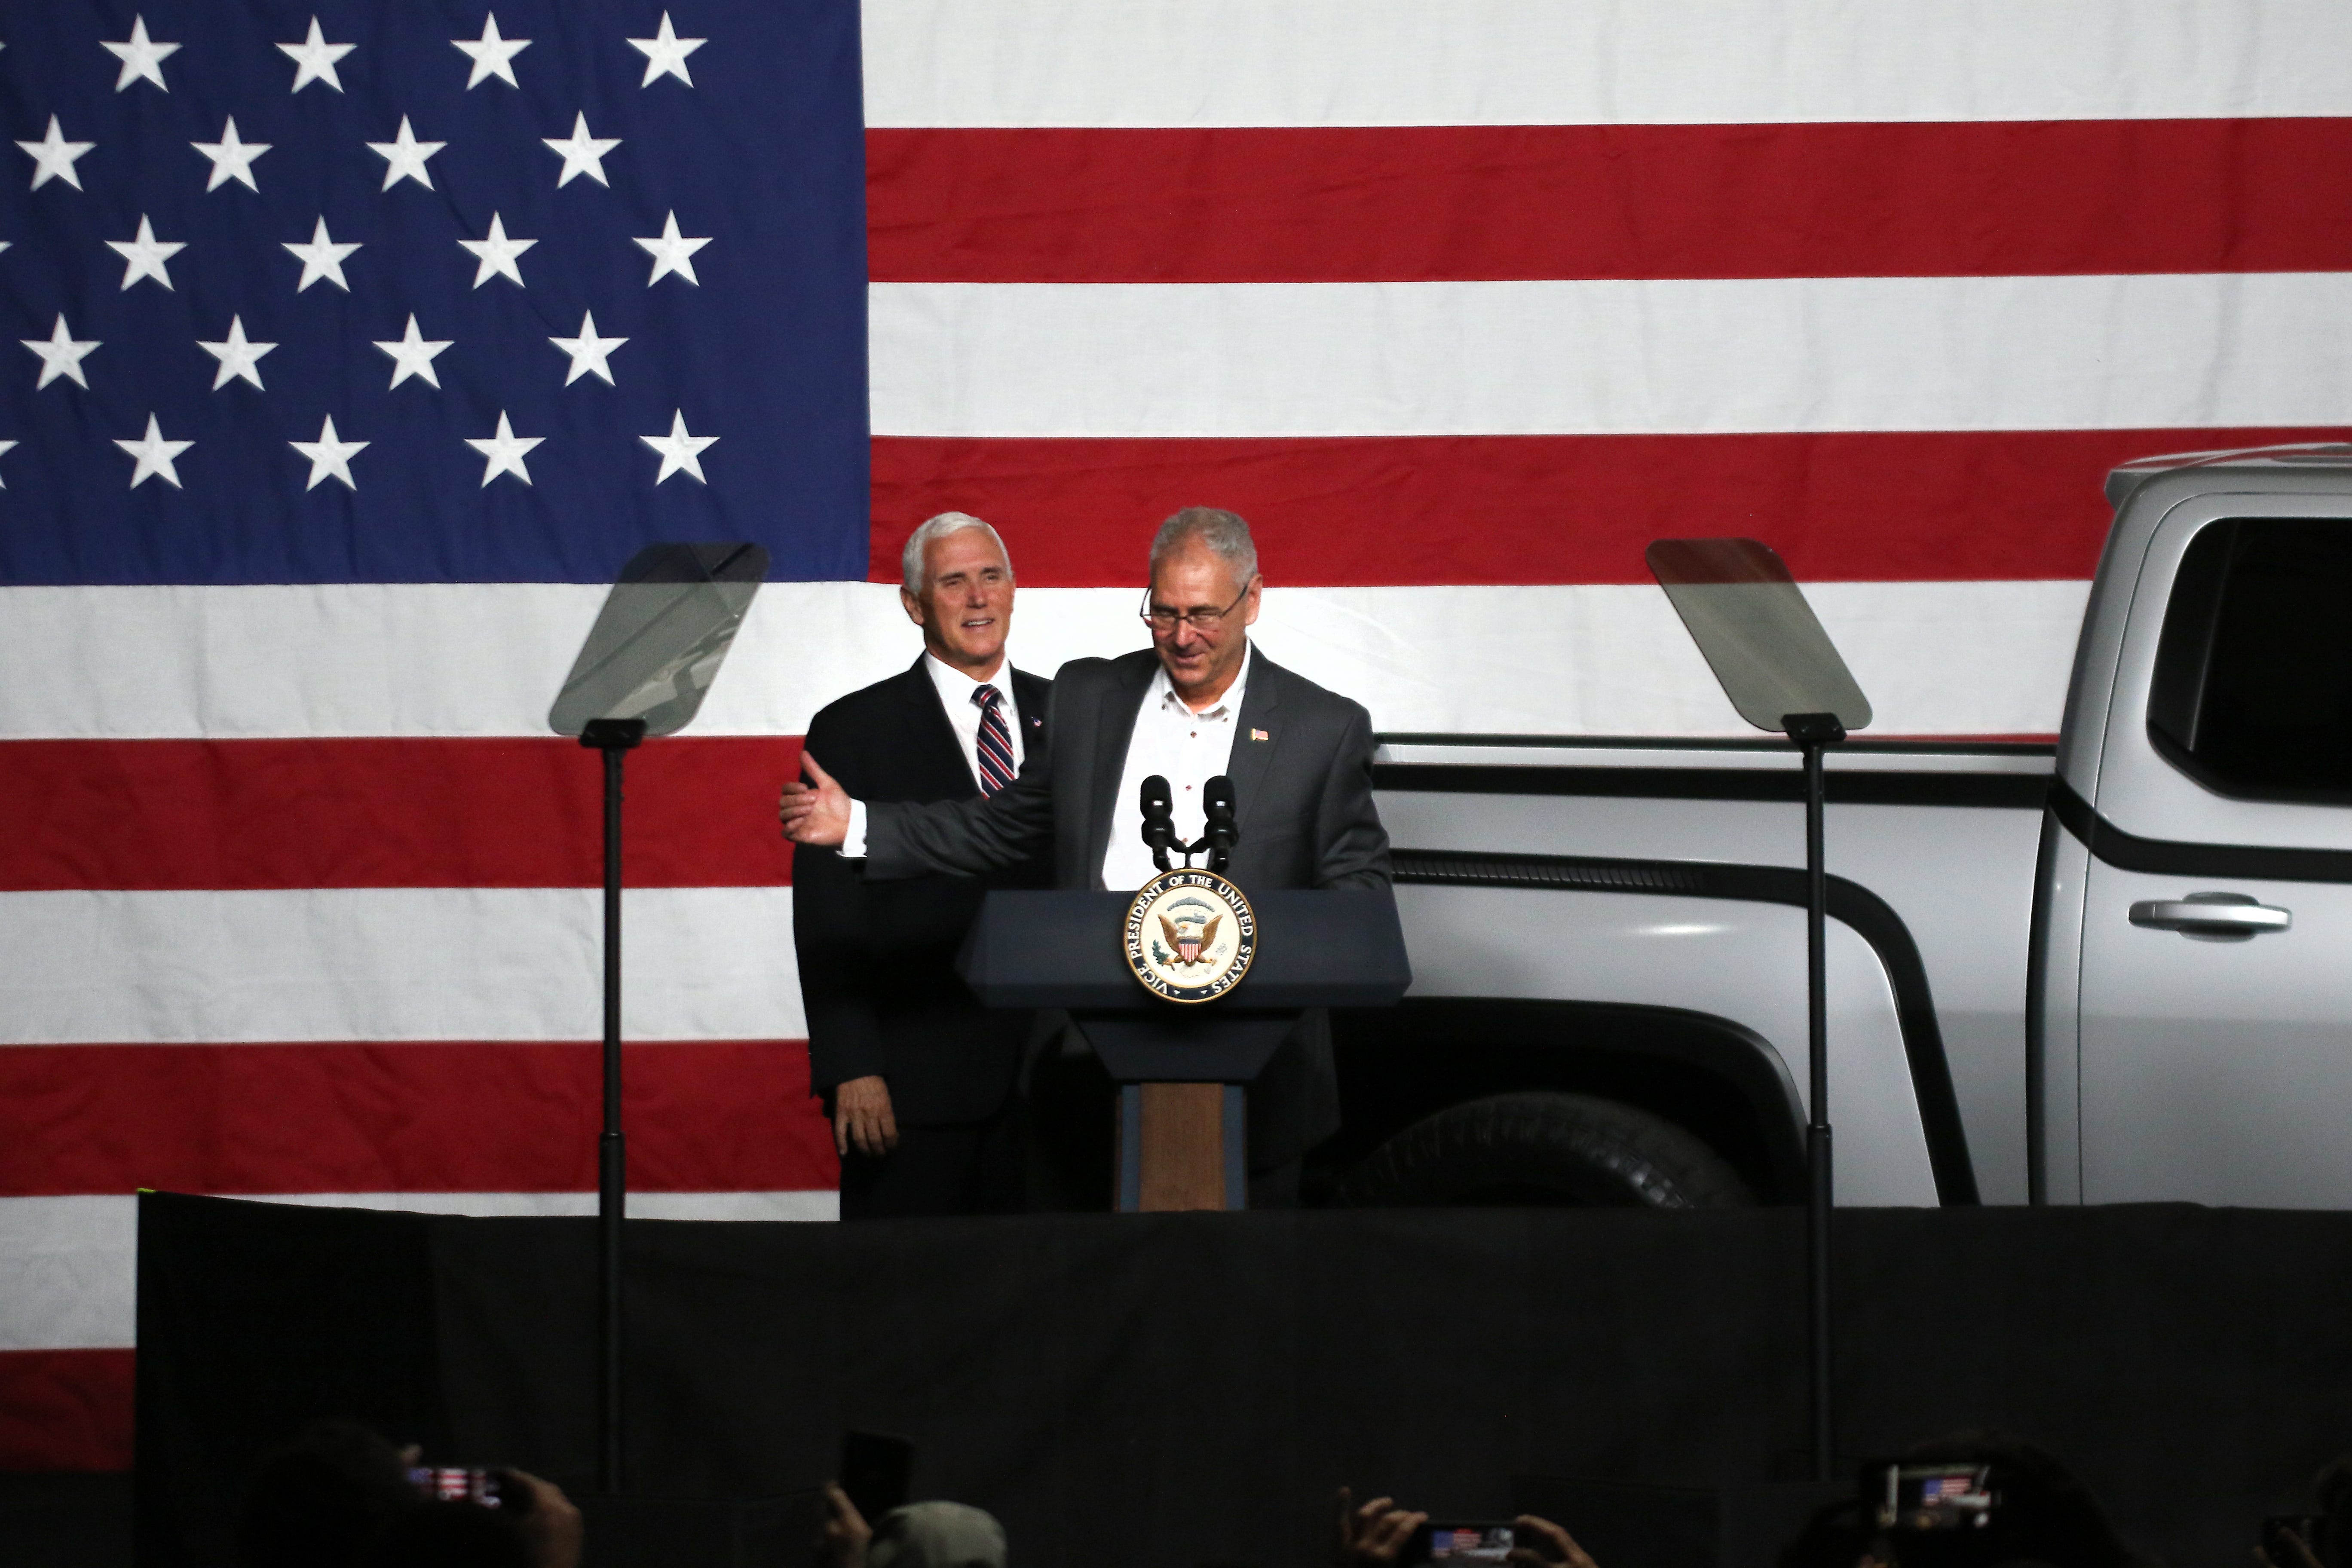 Lordstown Motors president and CEO Steve Burns stands on stage with Vice President Mike Pence during the unveiling of the Lordstown Motors' electric truck, Endurance.